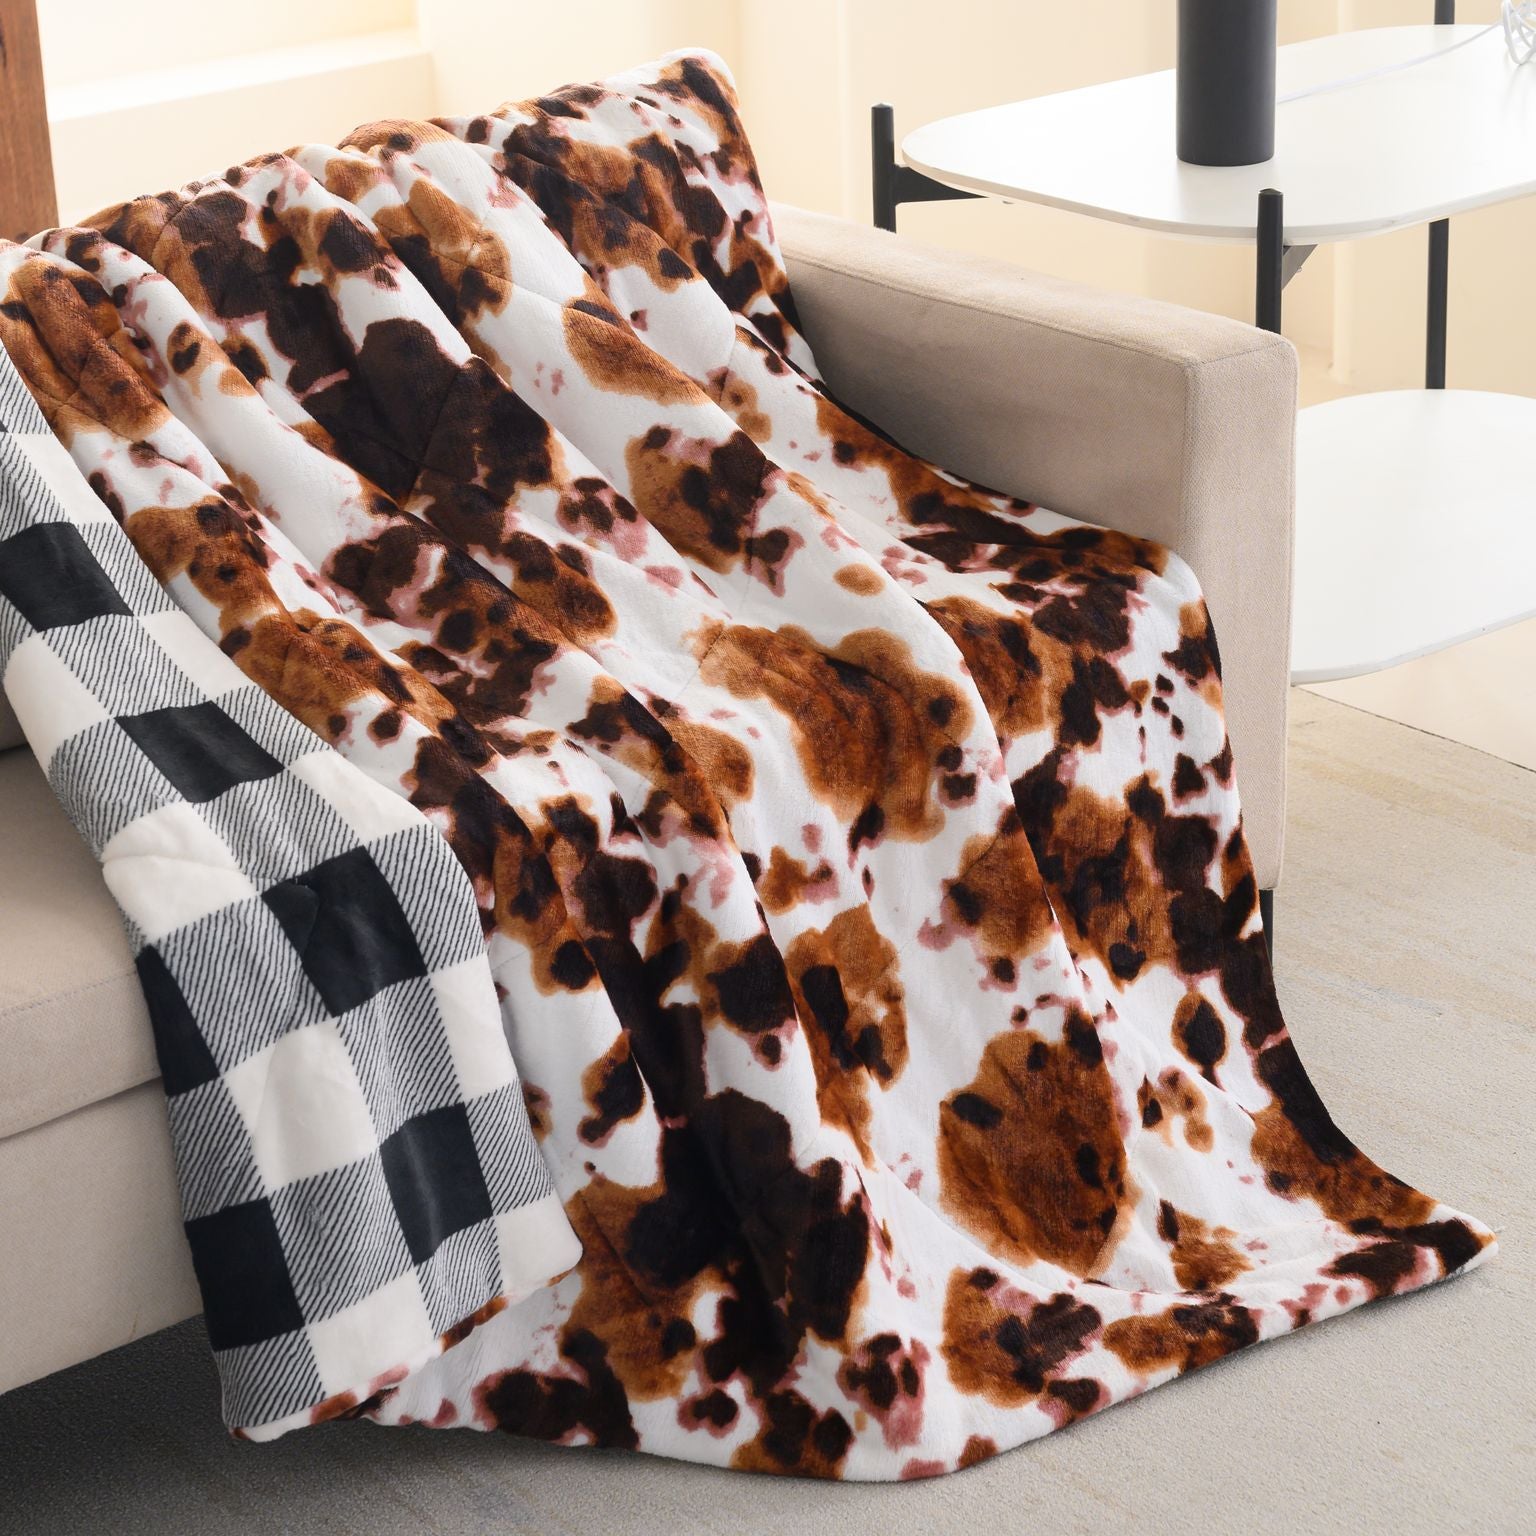 Quilted Velvet to Velvet Throw Blanket 50 x 60 inches Cowhide to Black and White Buffalo Check